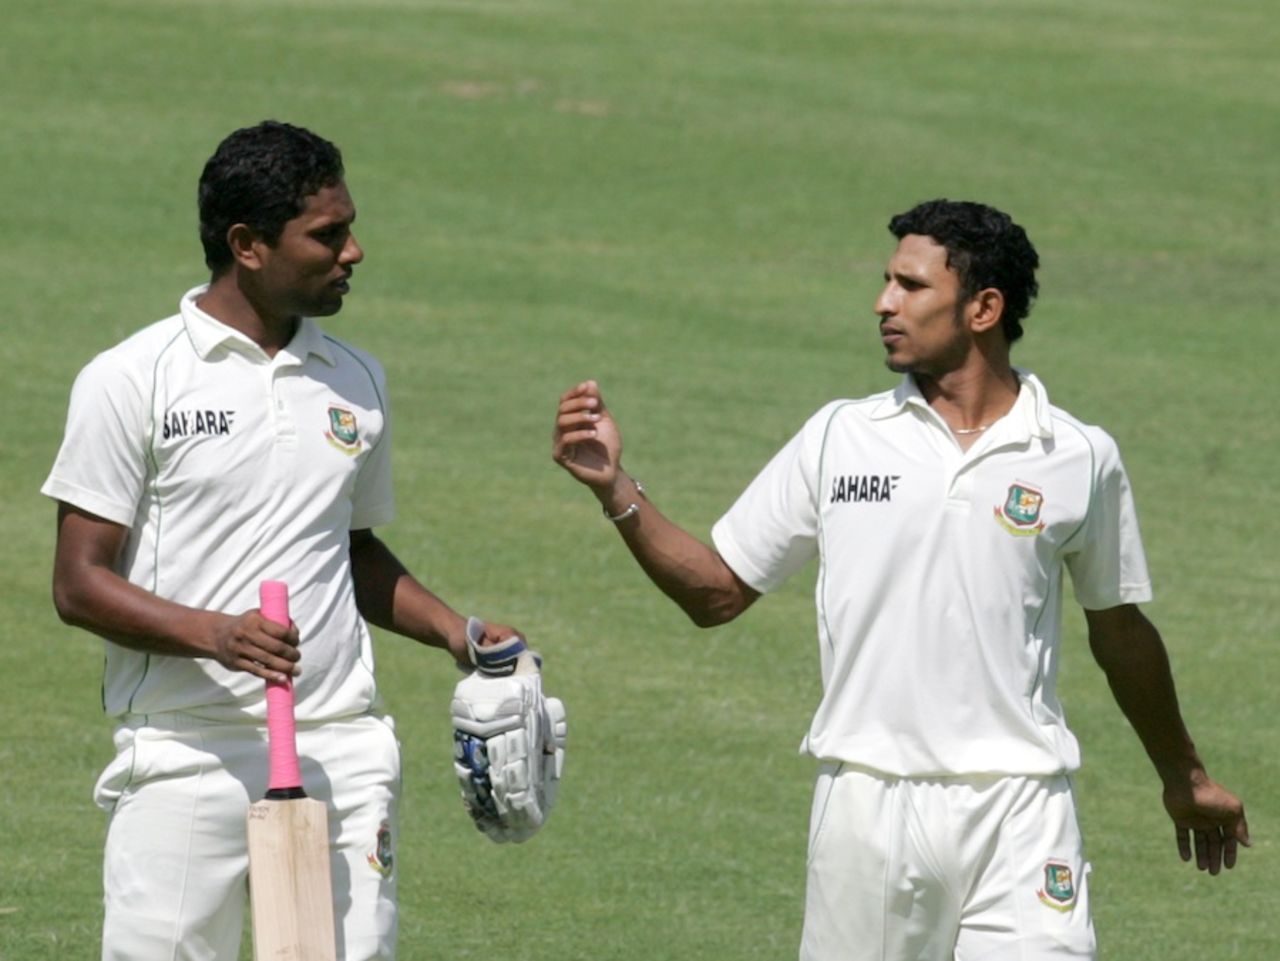 Nasir Hossain helped Bangladesh add 91 in the morning session, Zimbabwe v Bangladesh, 2nd Test, Harare, 2nd day, April 26, 2013